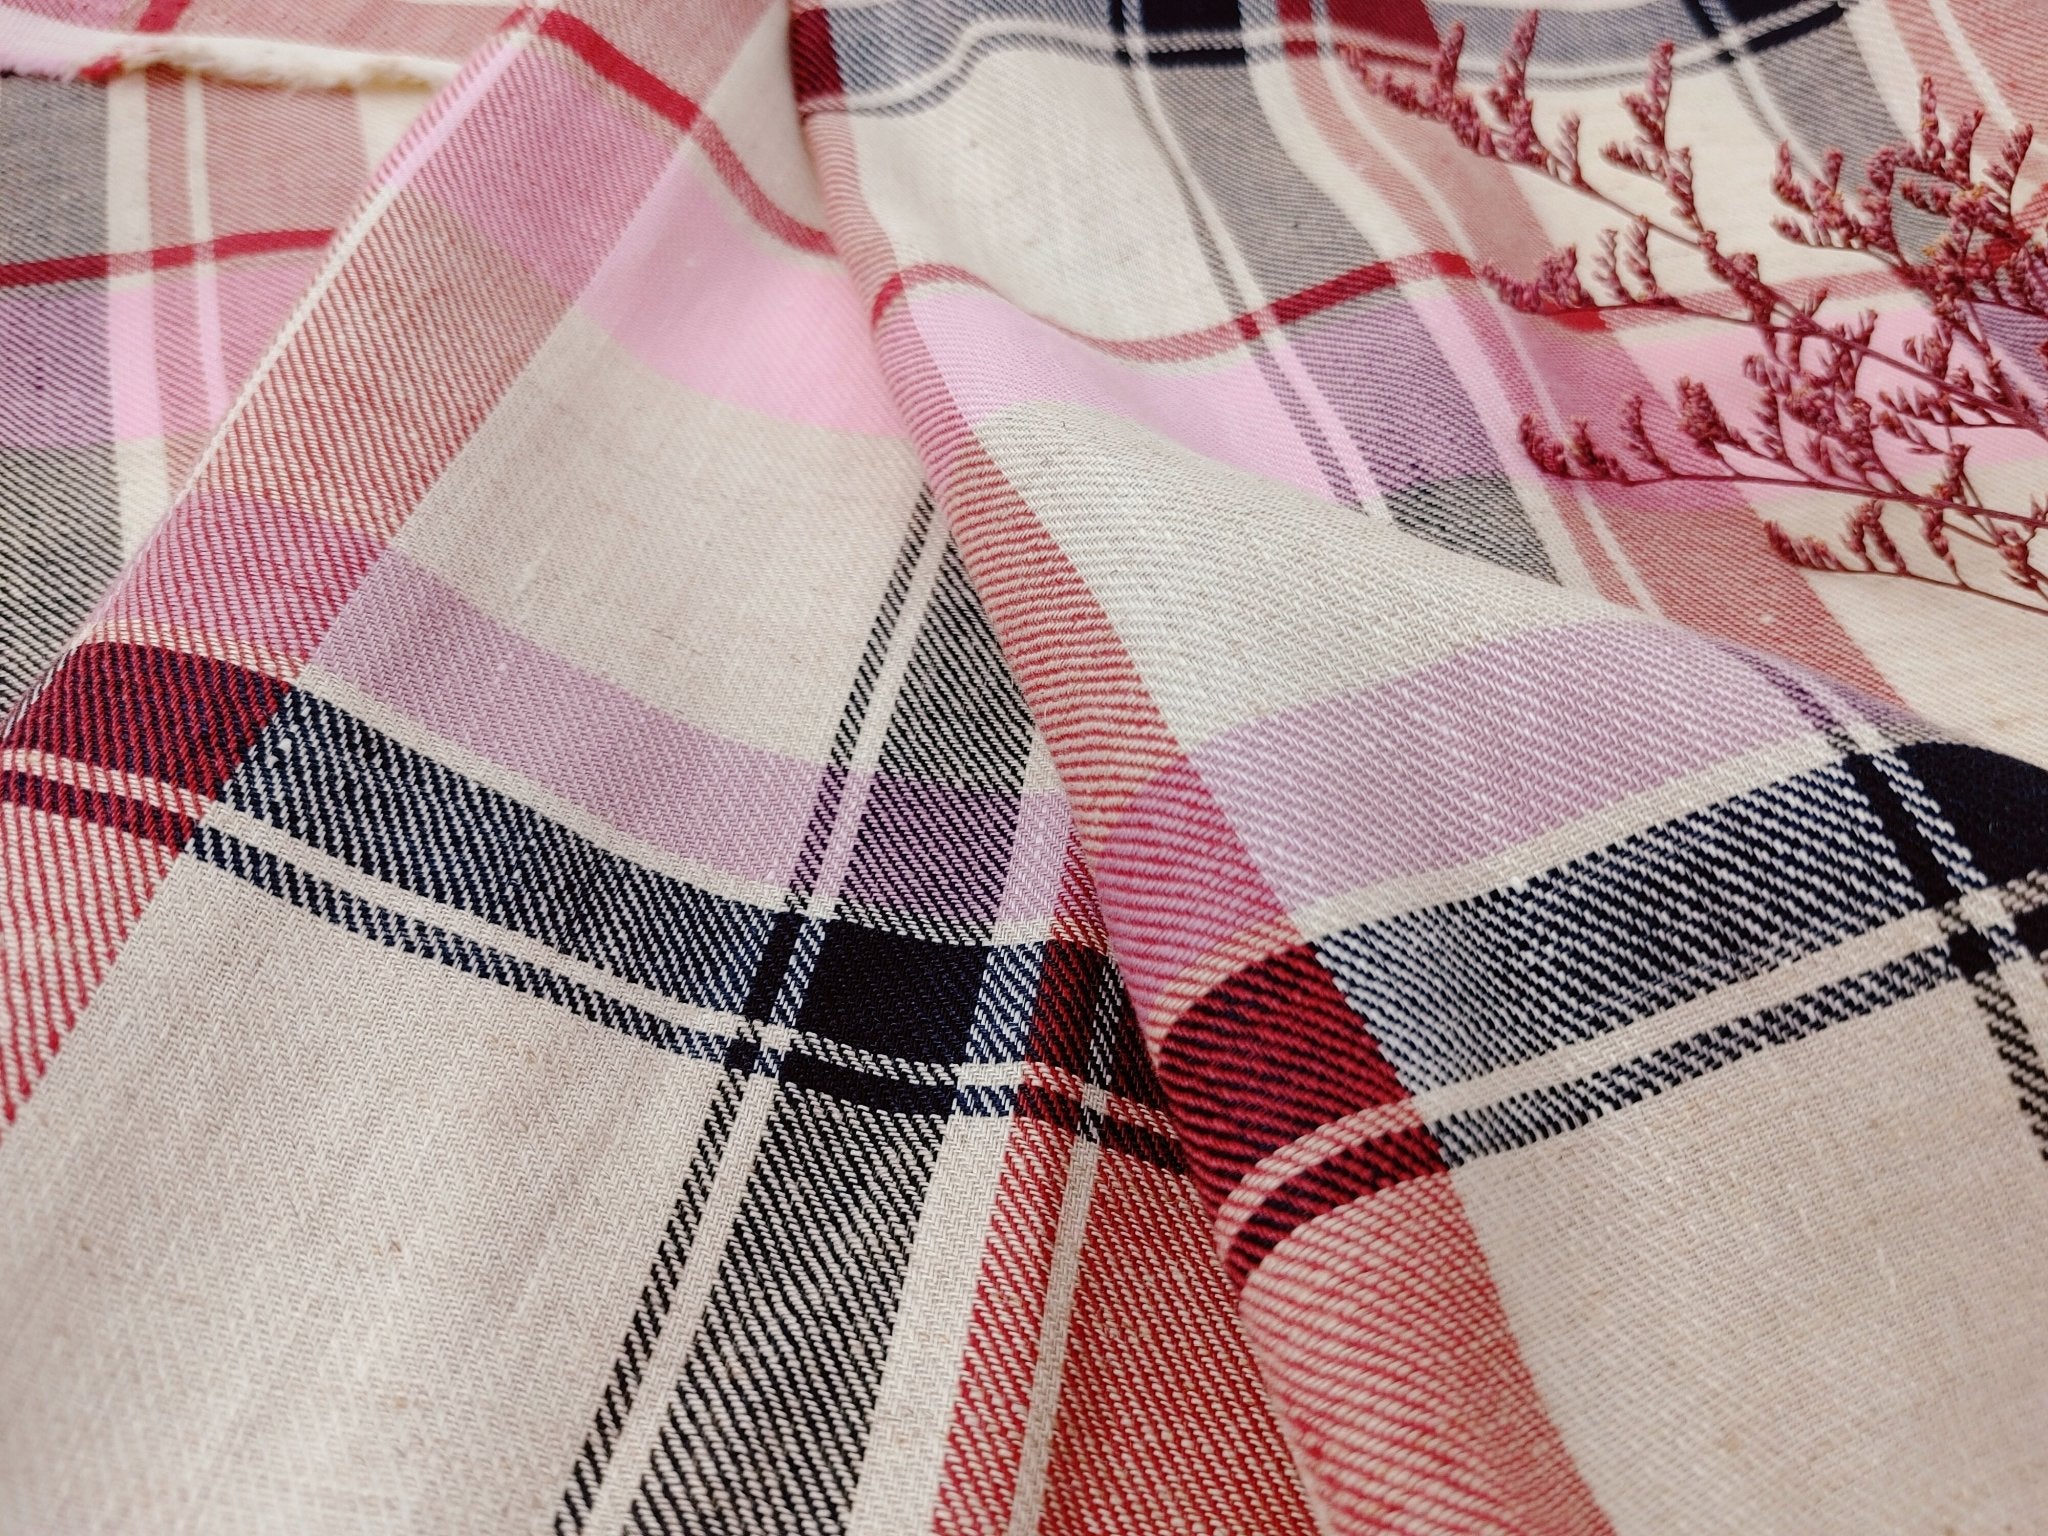 Rosy Check: Pink Linen Cotton Twill Plaid Fabric 4213 - The Linen Lab - Pink